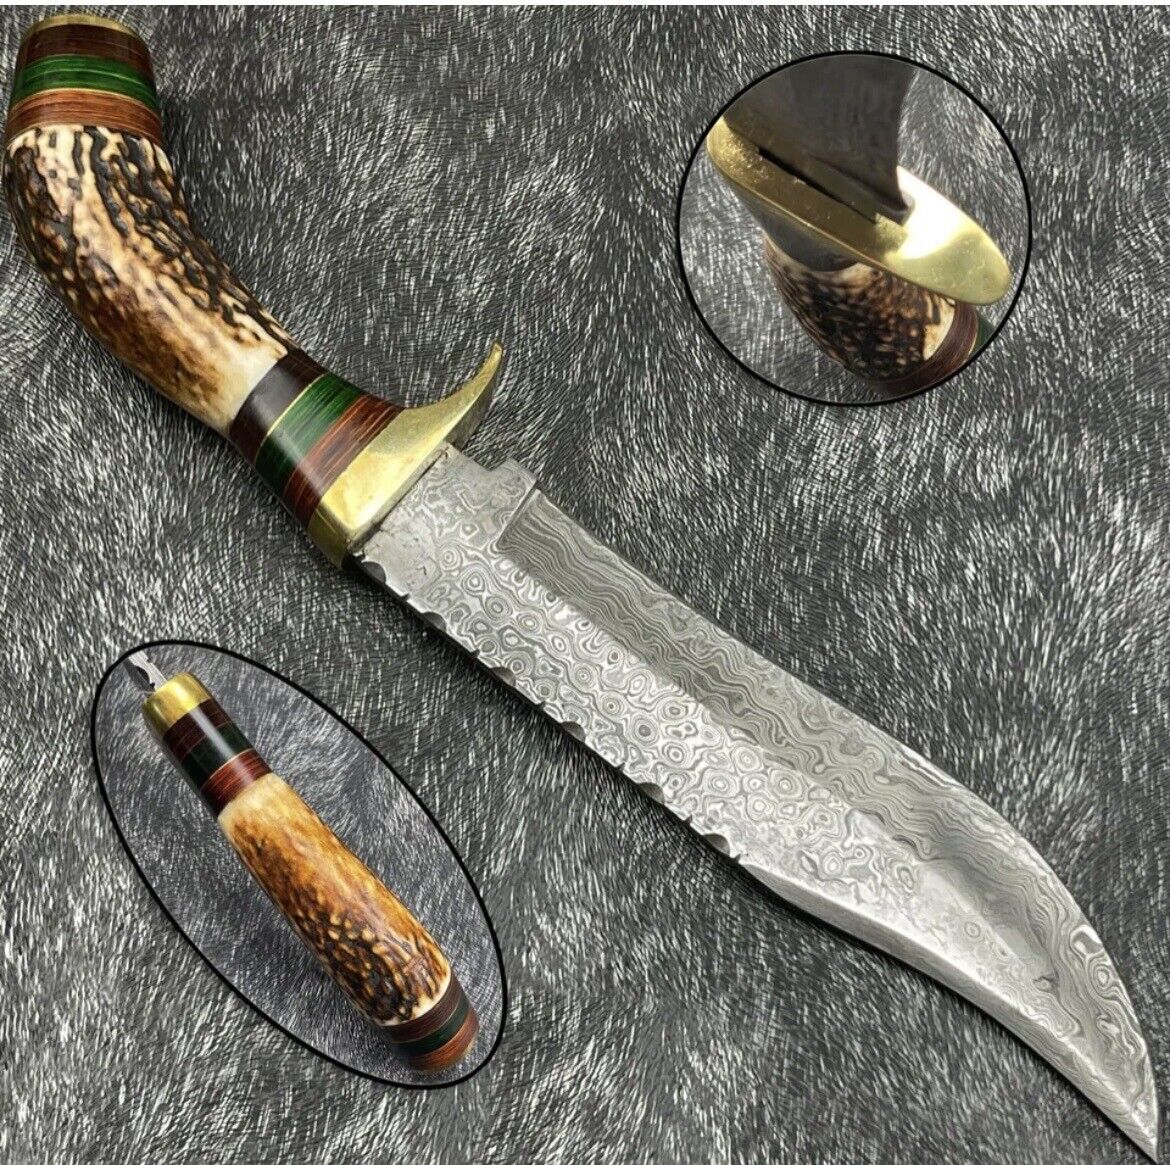 Stag Knives Hand Forged Damascus Steel Stag Antler Handle Hunting Knife 10”